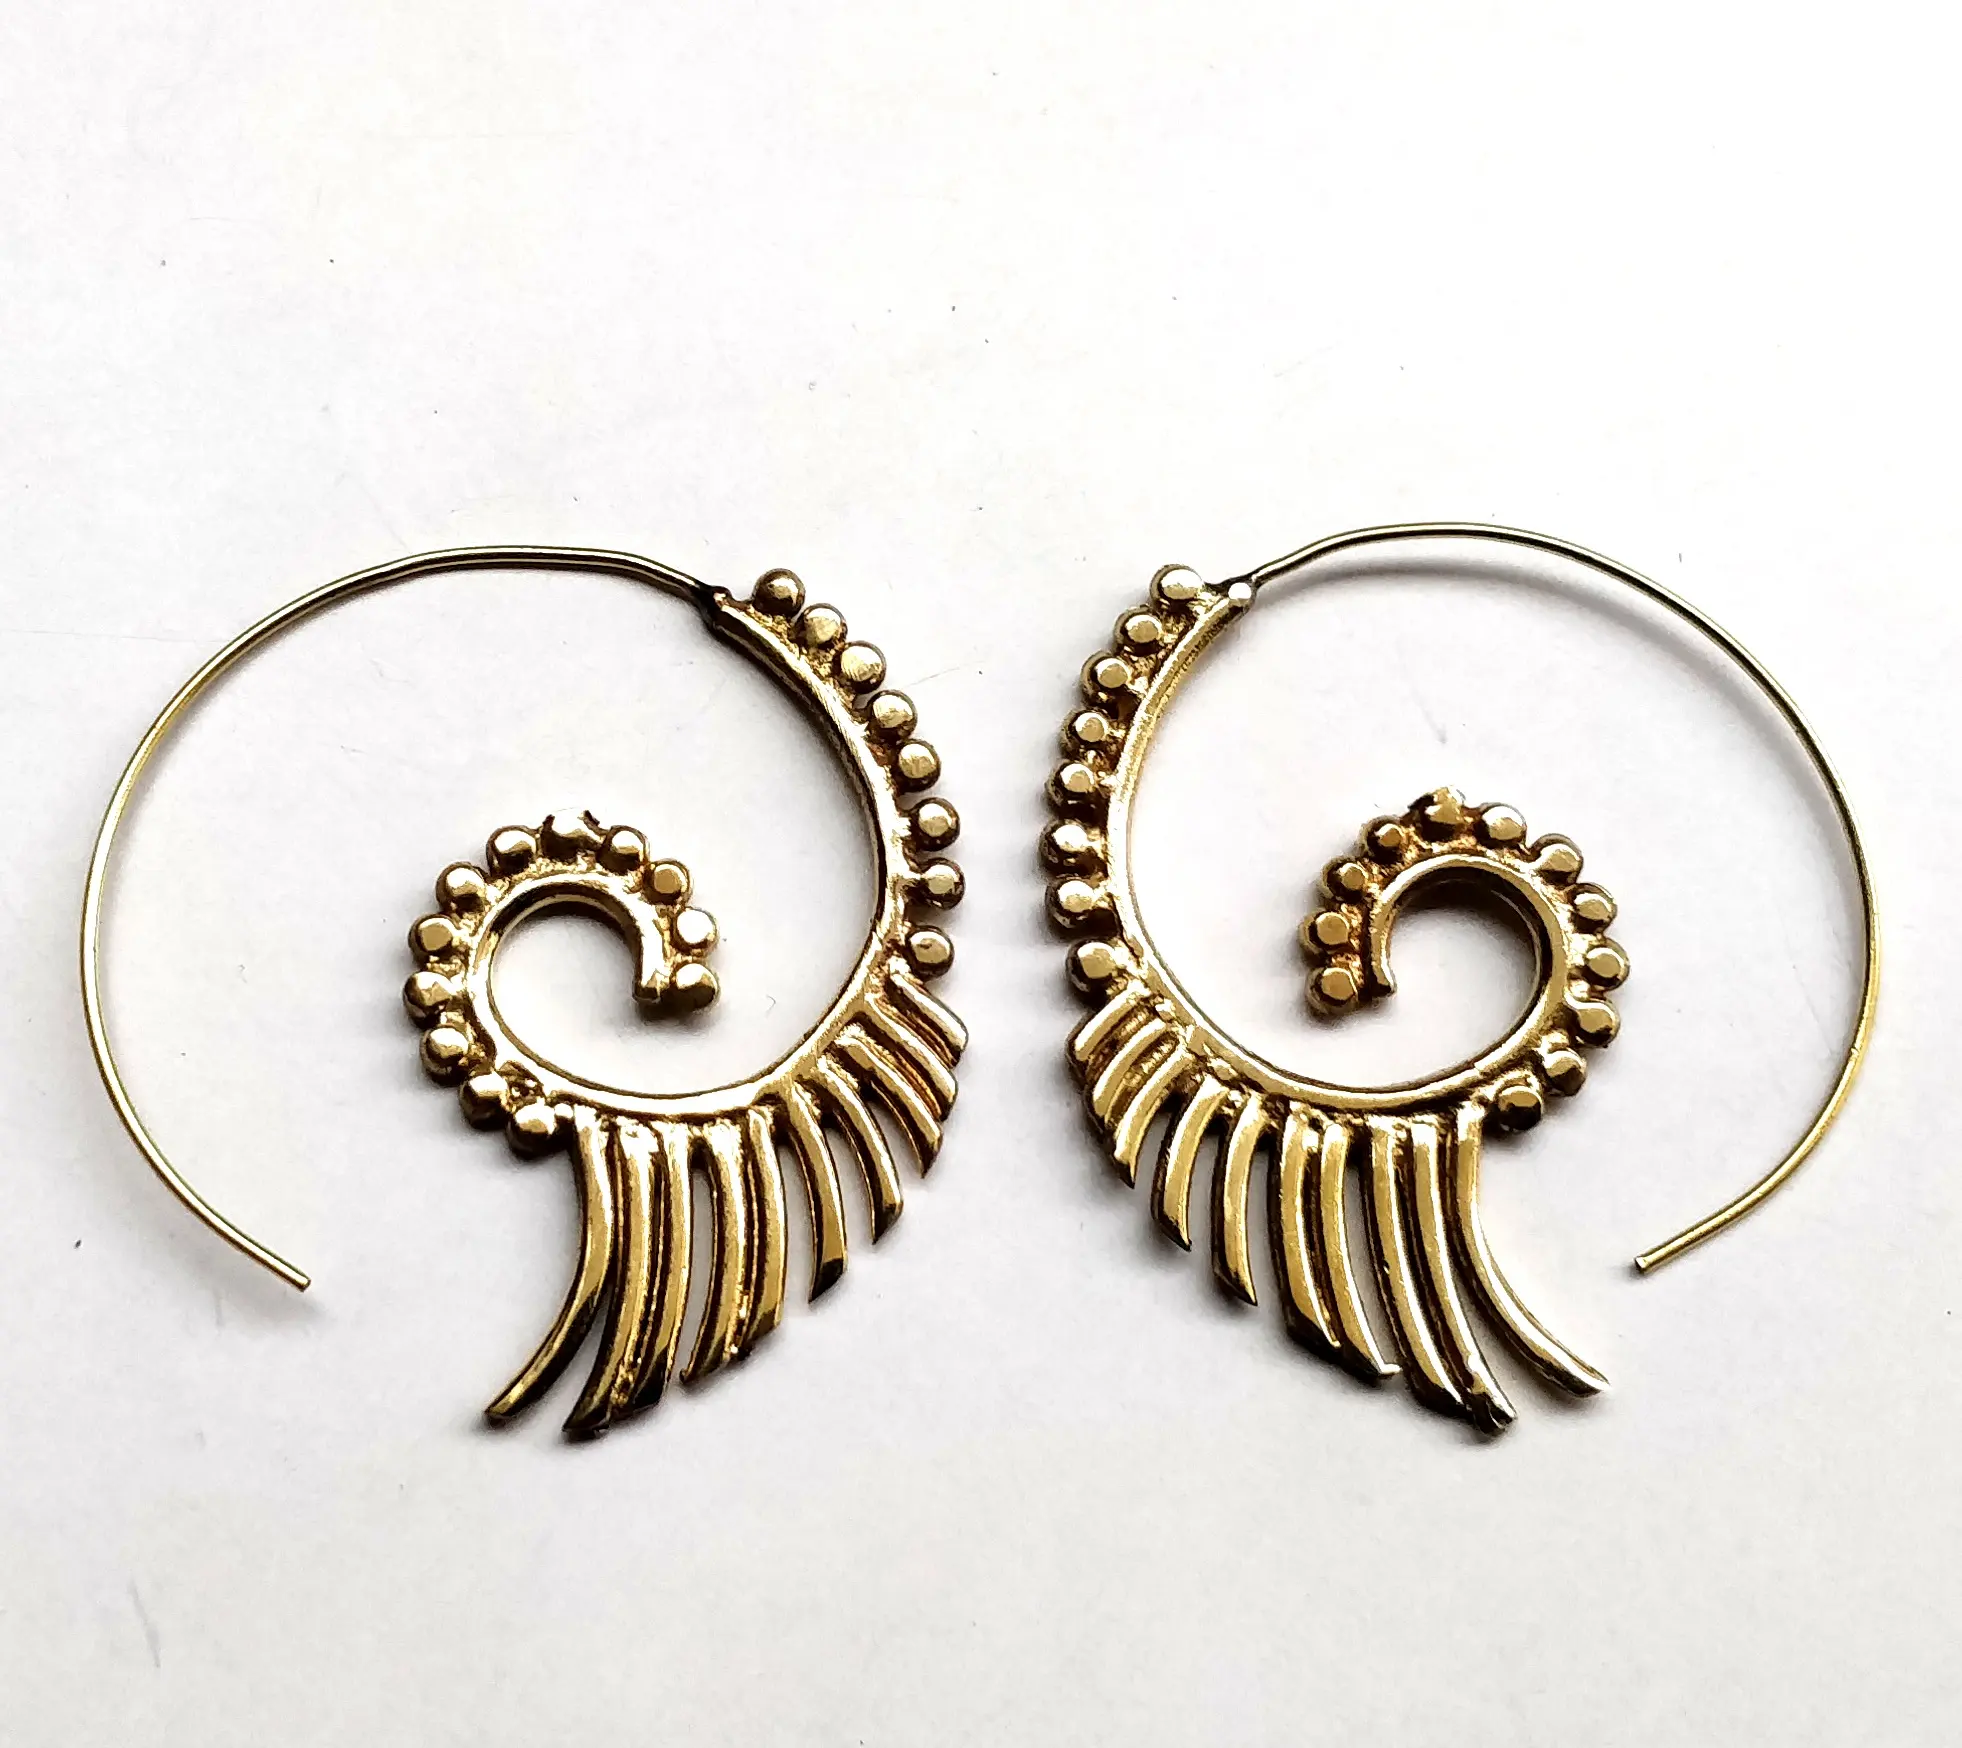 Vintage Tribal Ethnic Mandala Earrings for Women Antique Gold Silver Color Geometric Spiral Indian Jewelry